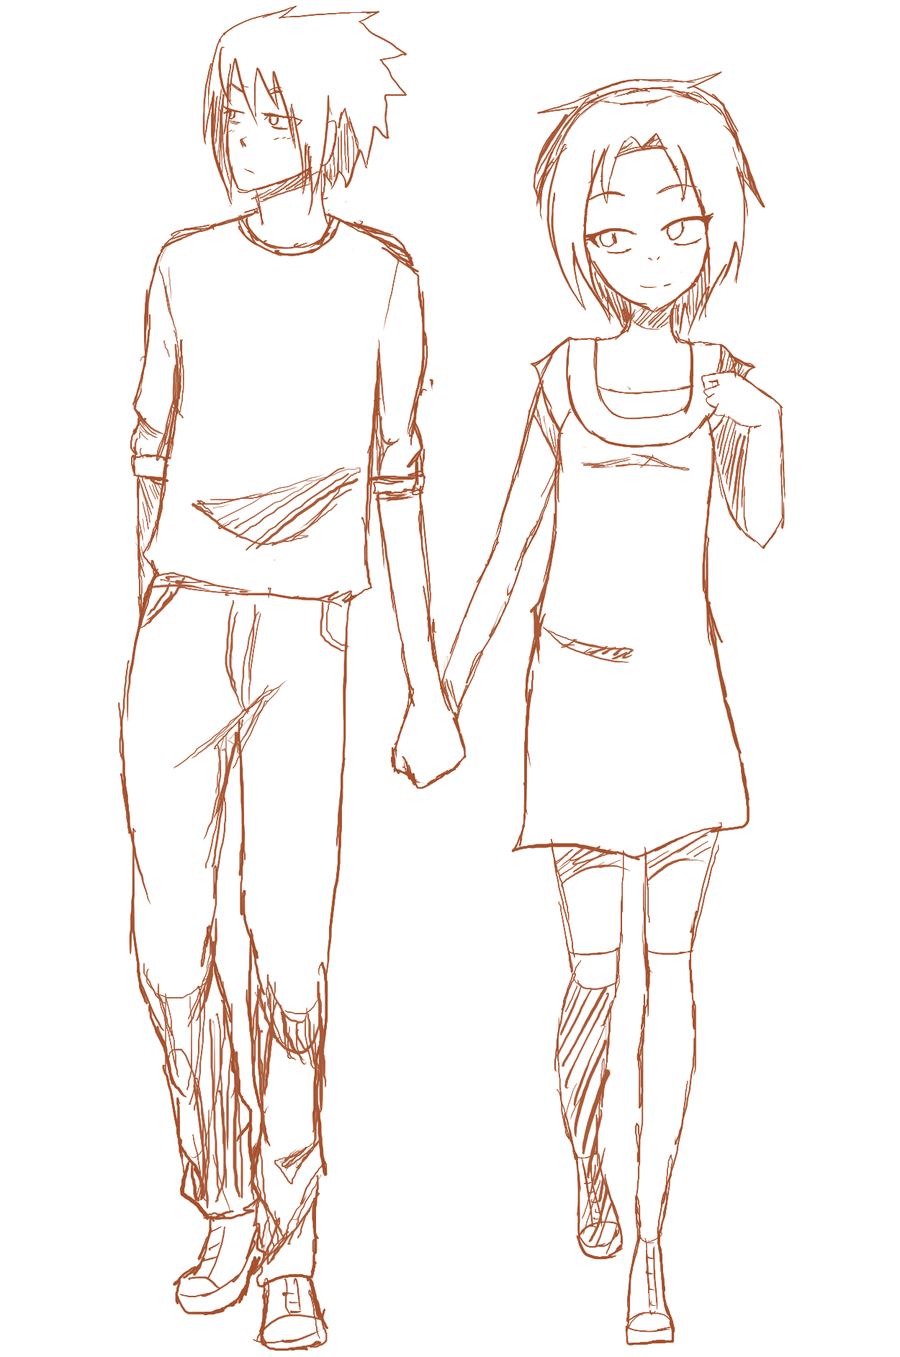 Anime Couple Holding Hands Drawing | Img Need